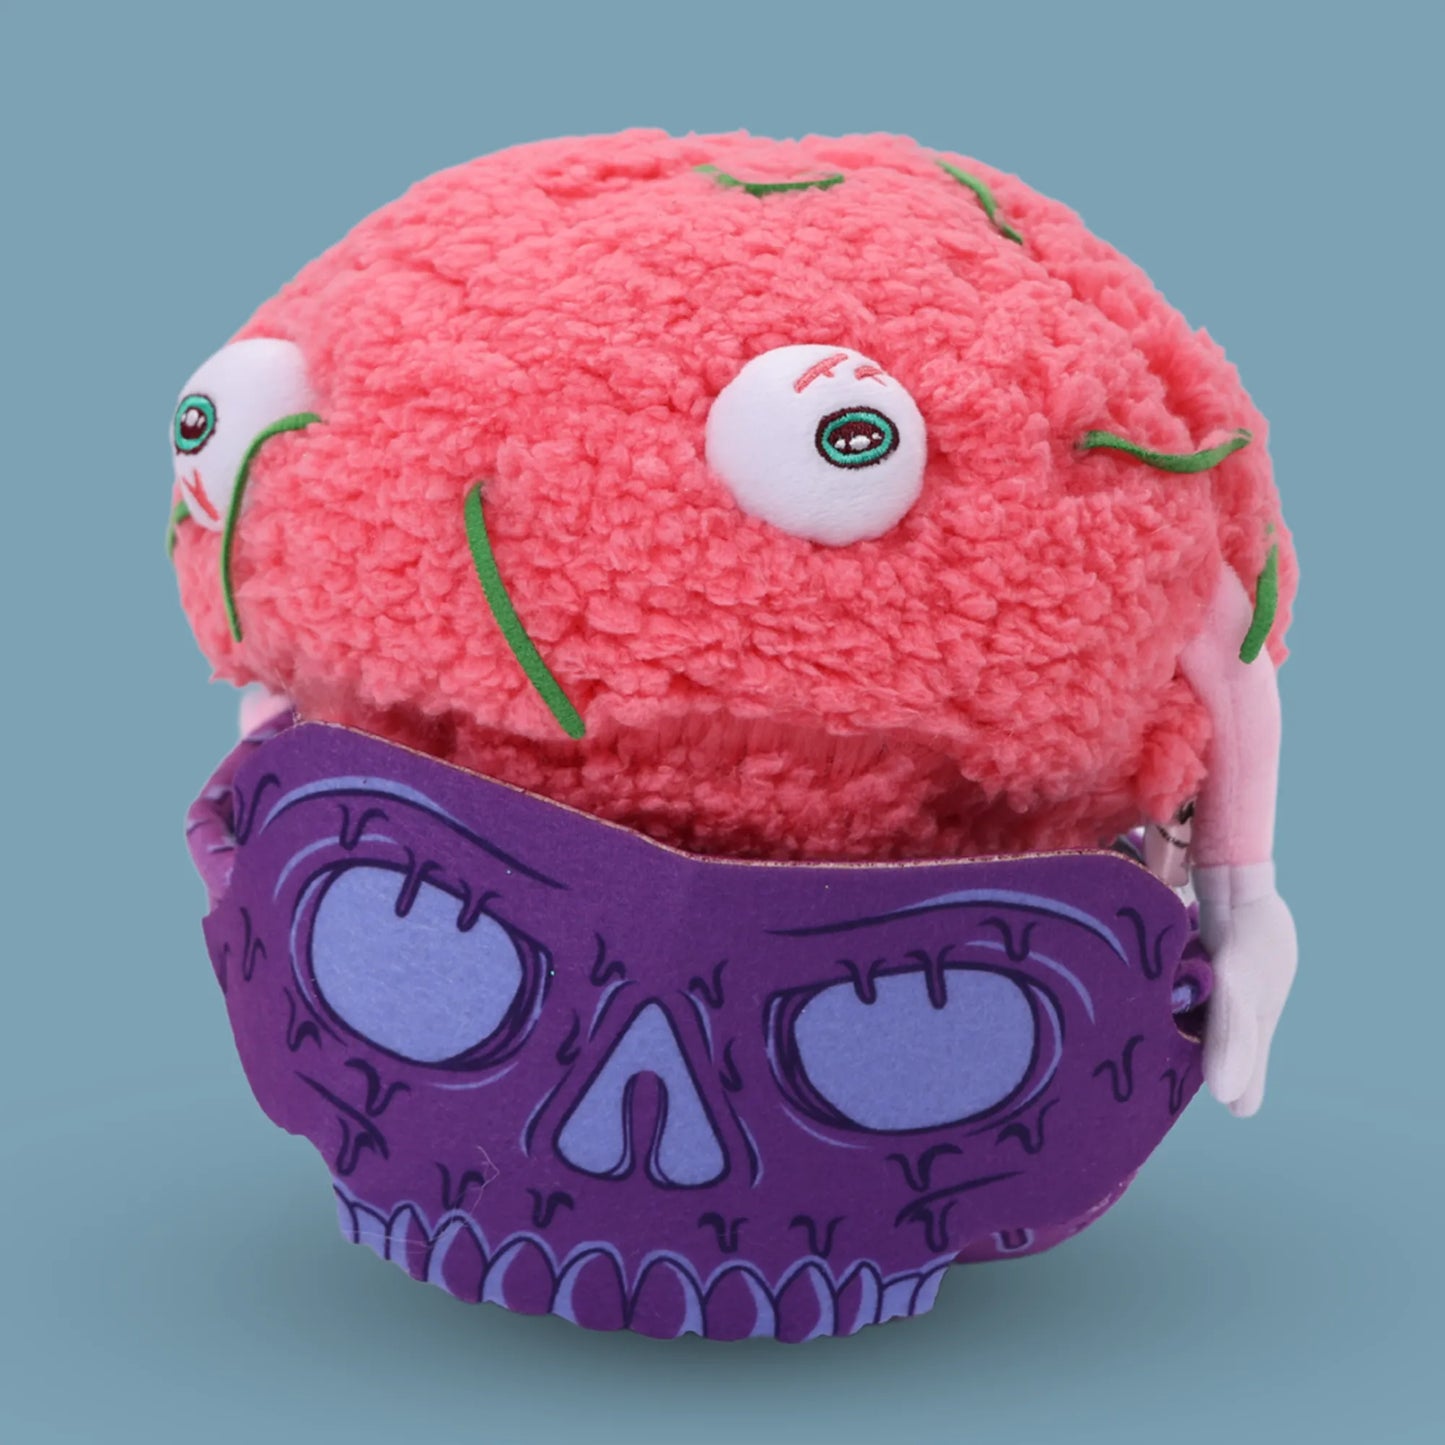 Brain holding on Plush 12 inches